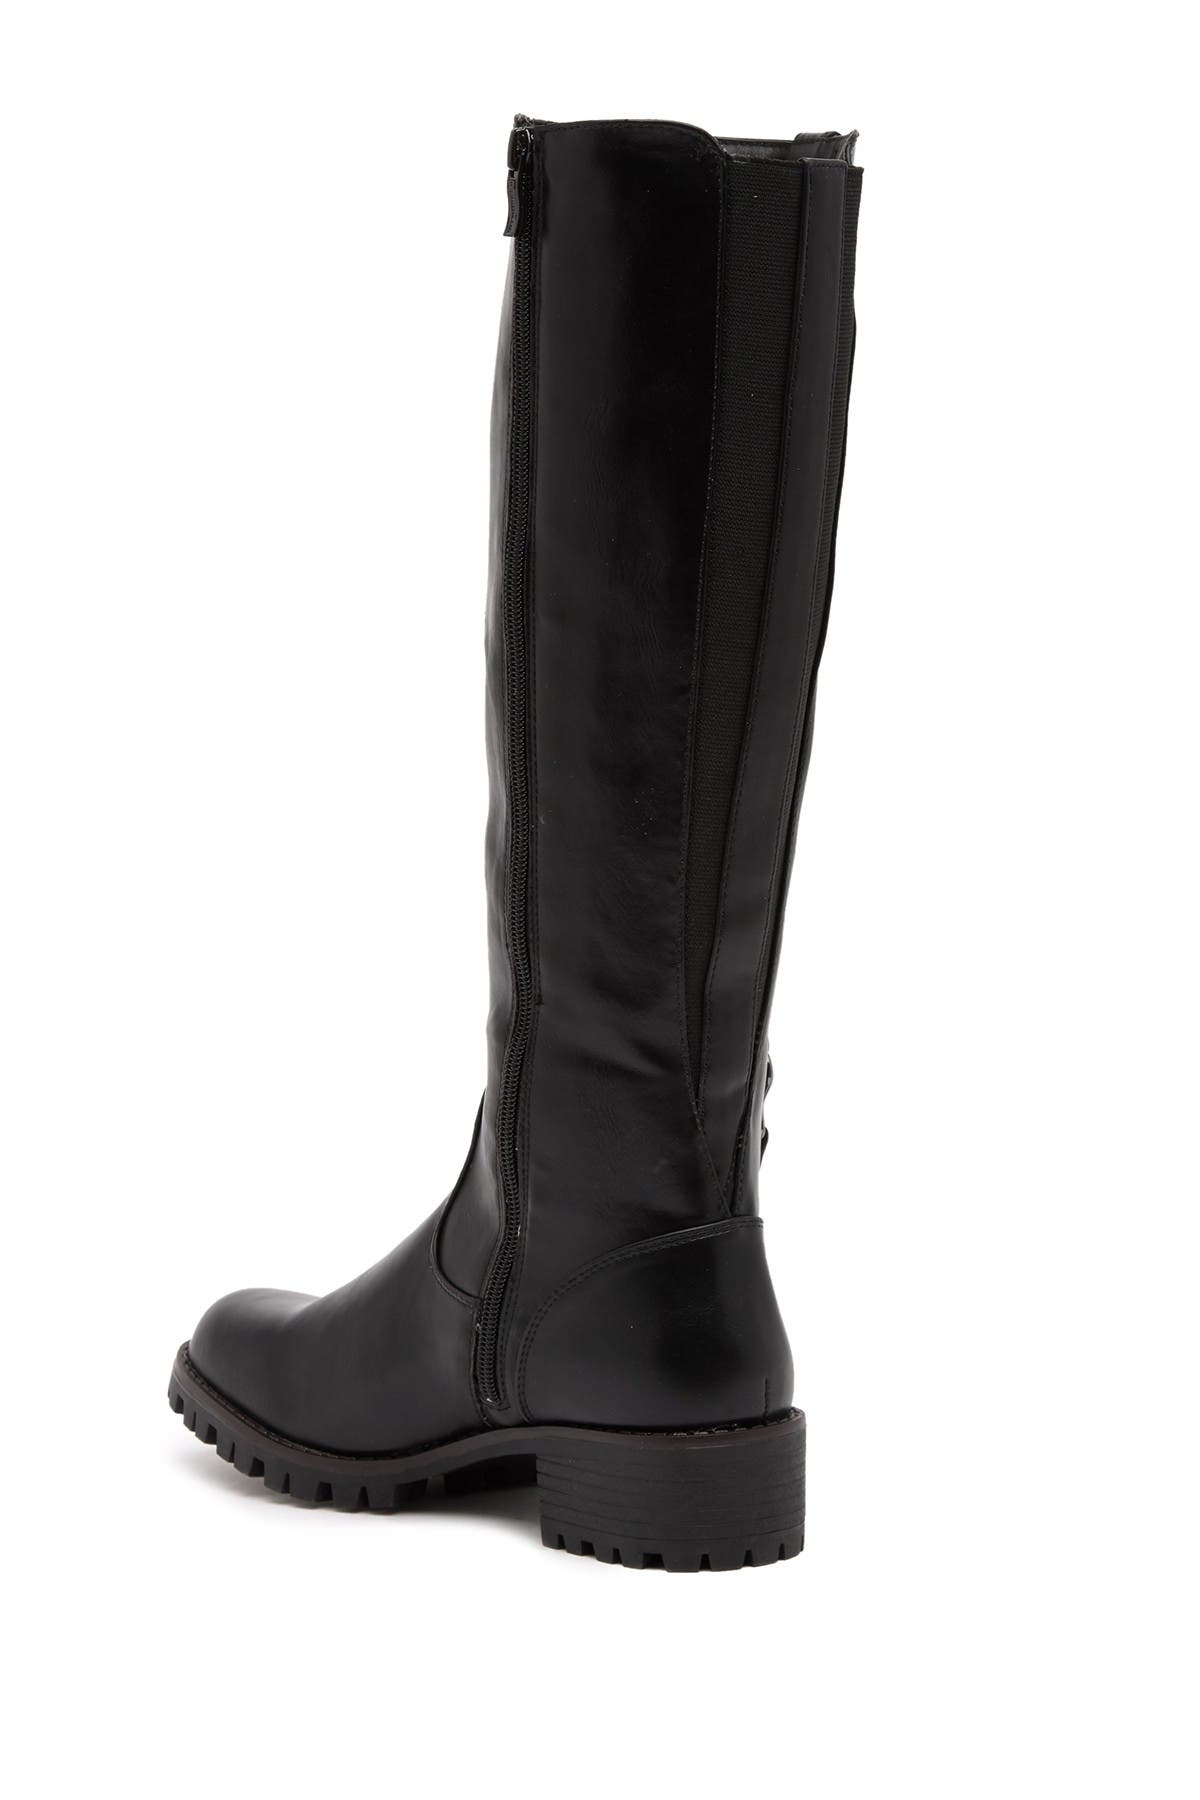 knee high boots canada